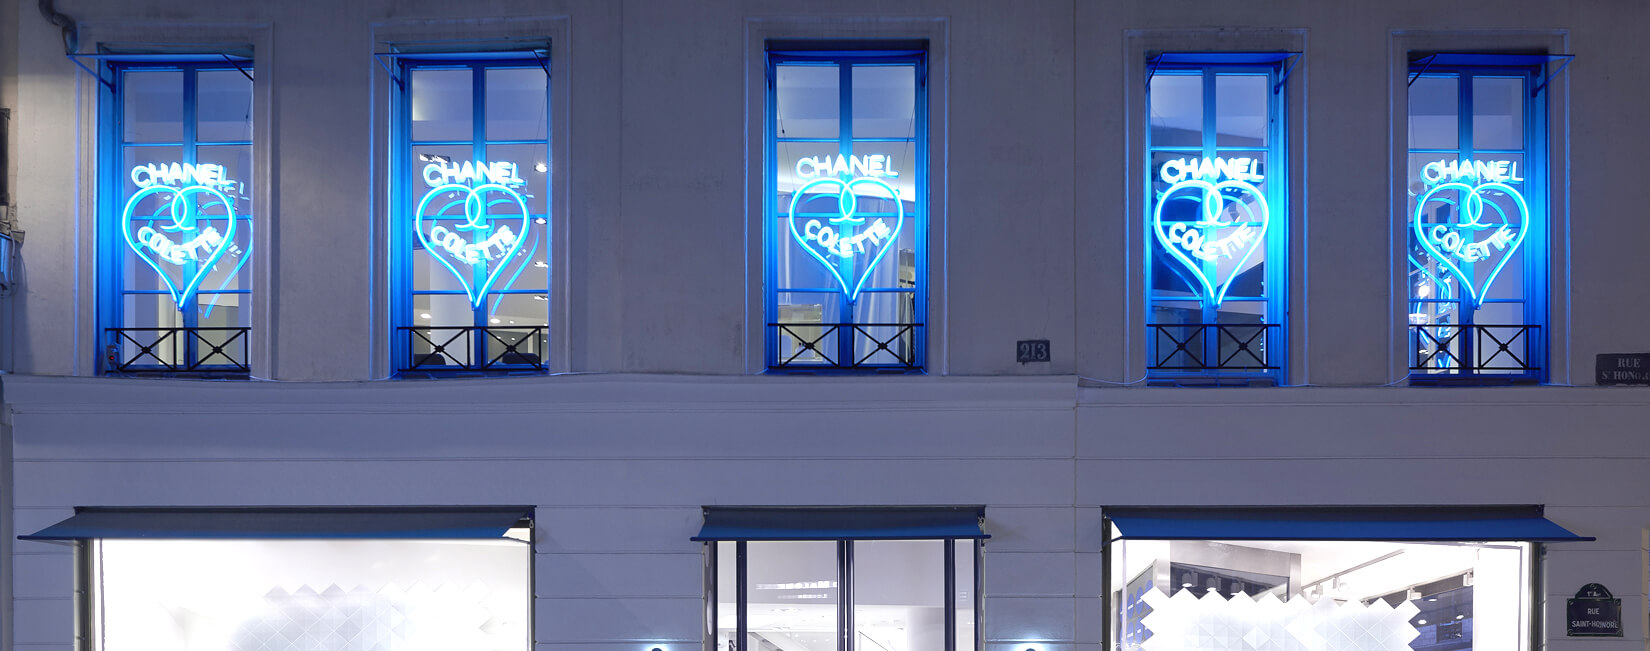 chanel at colette